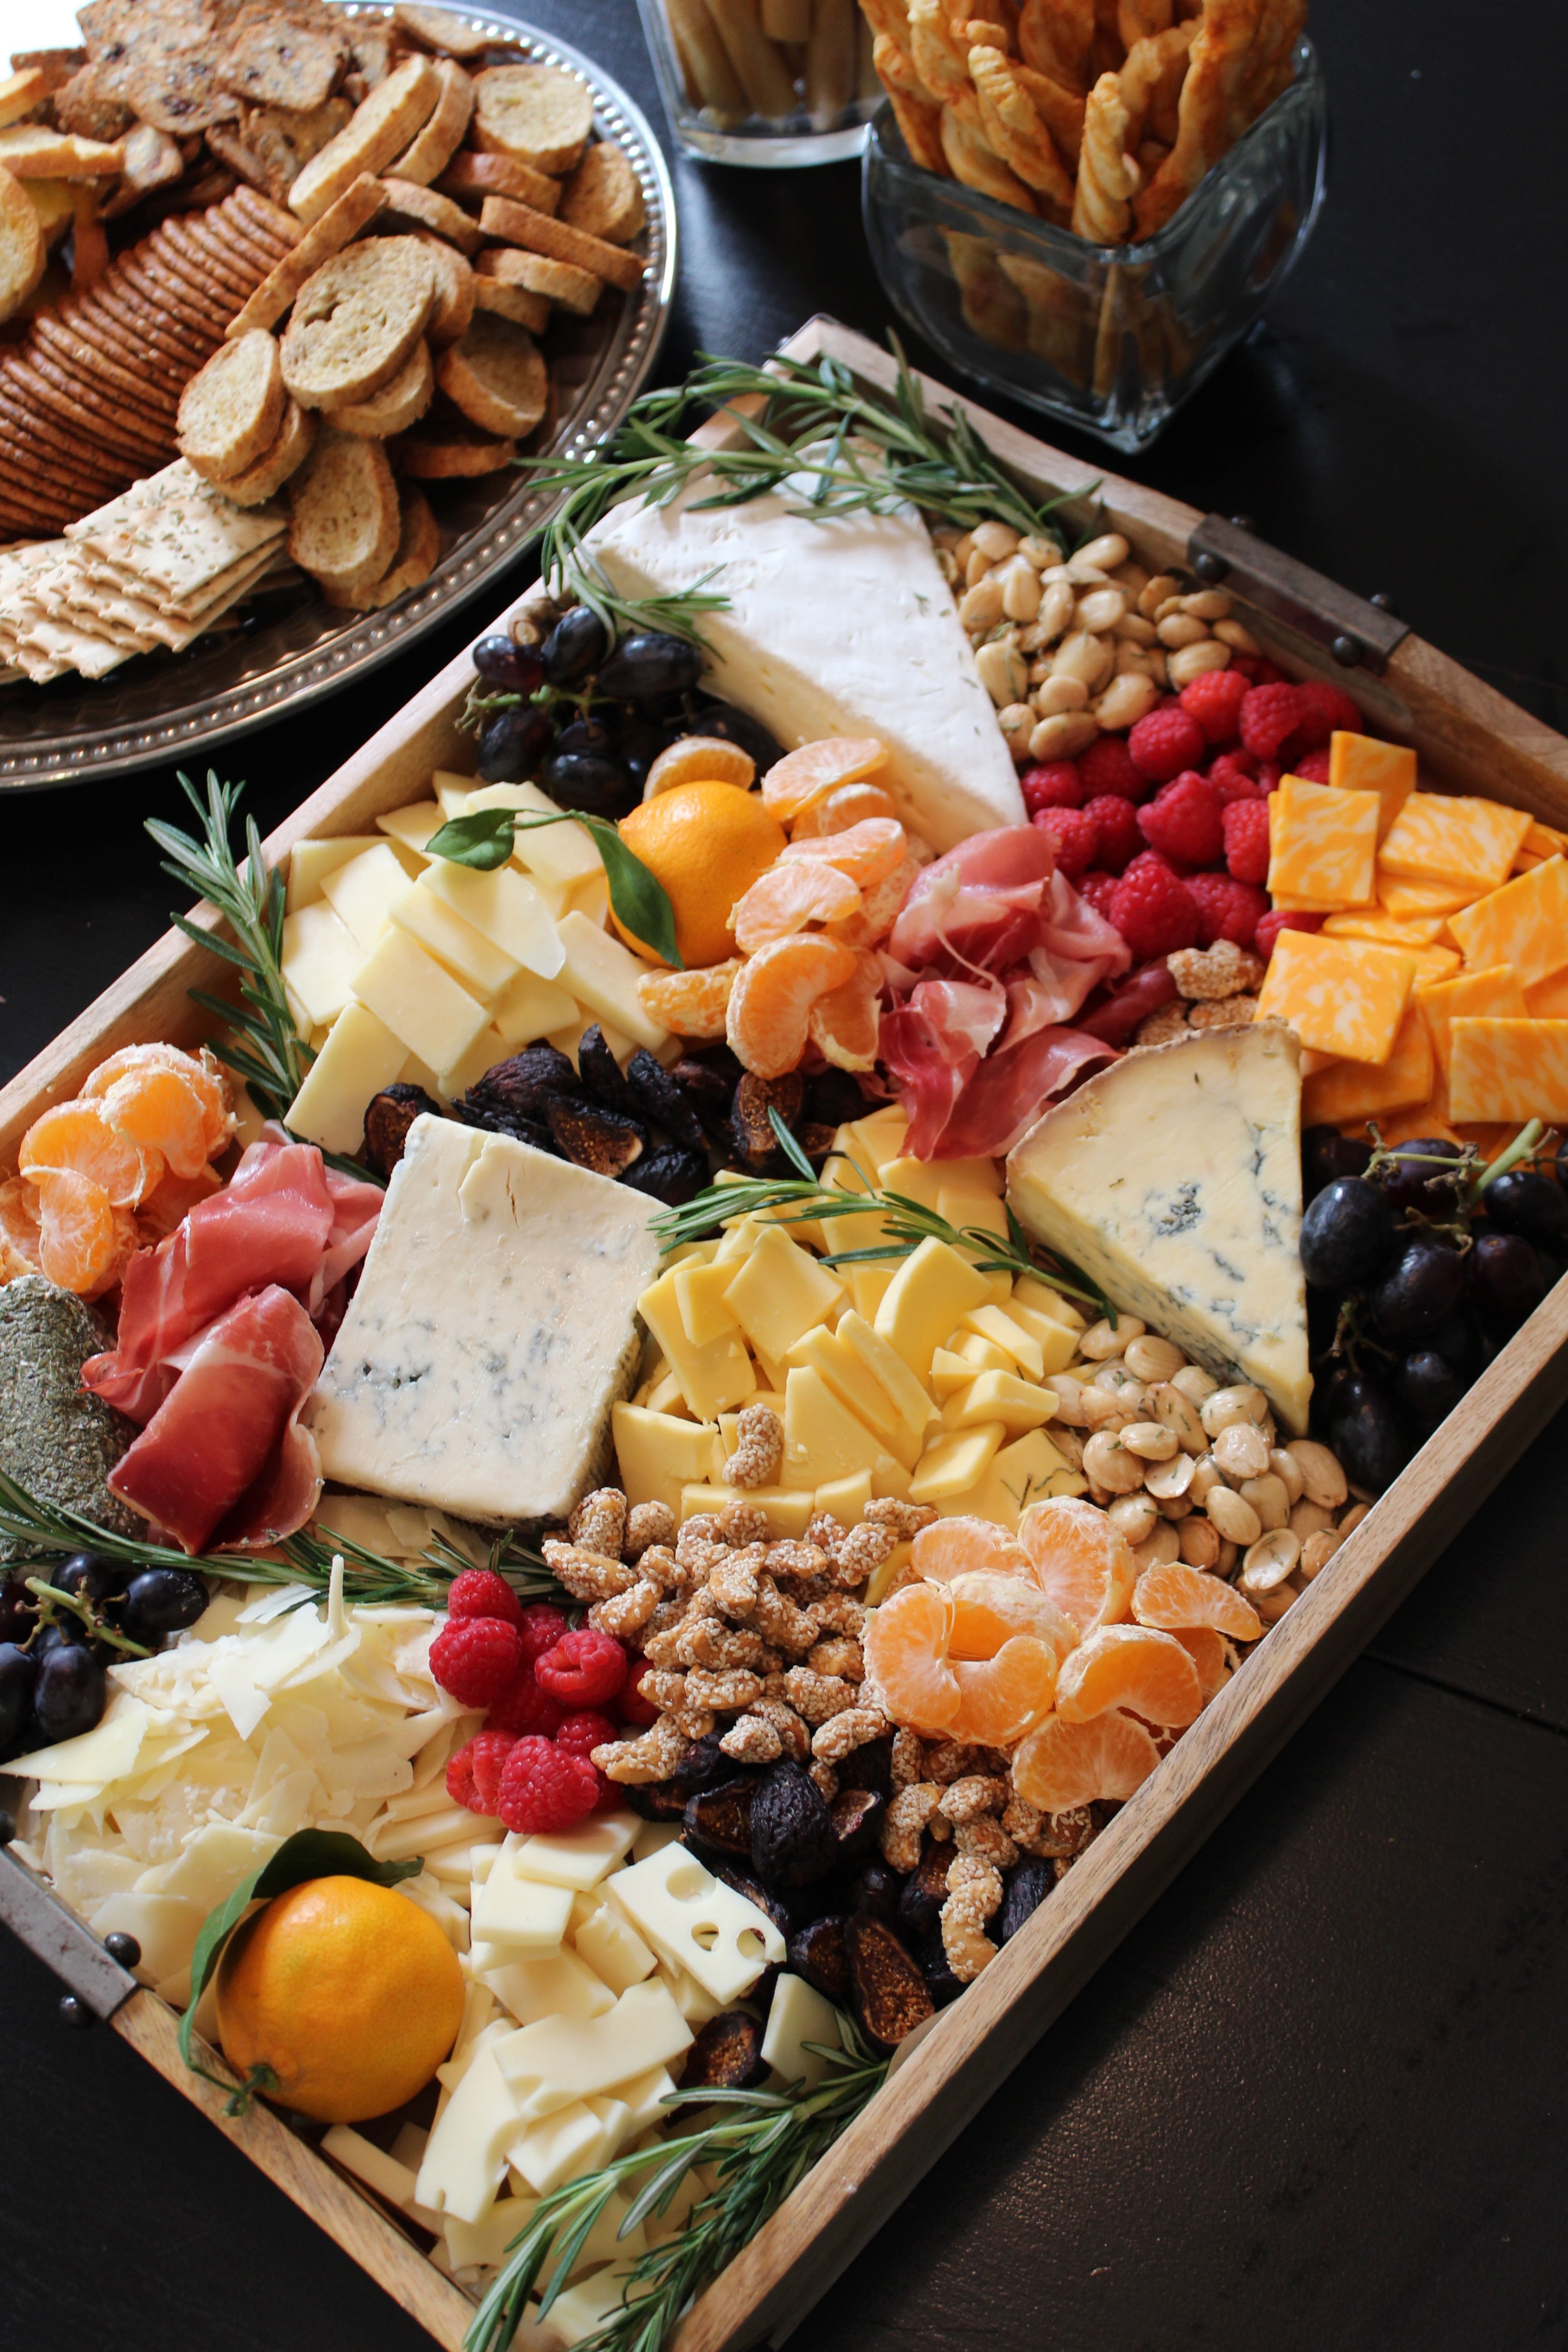 Look at this amazing rustic cheese and fruit tray…